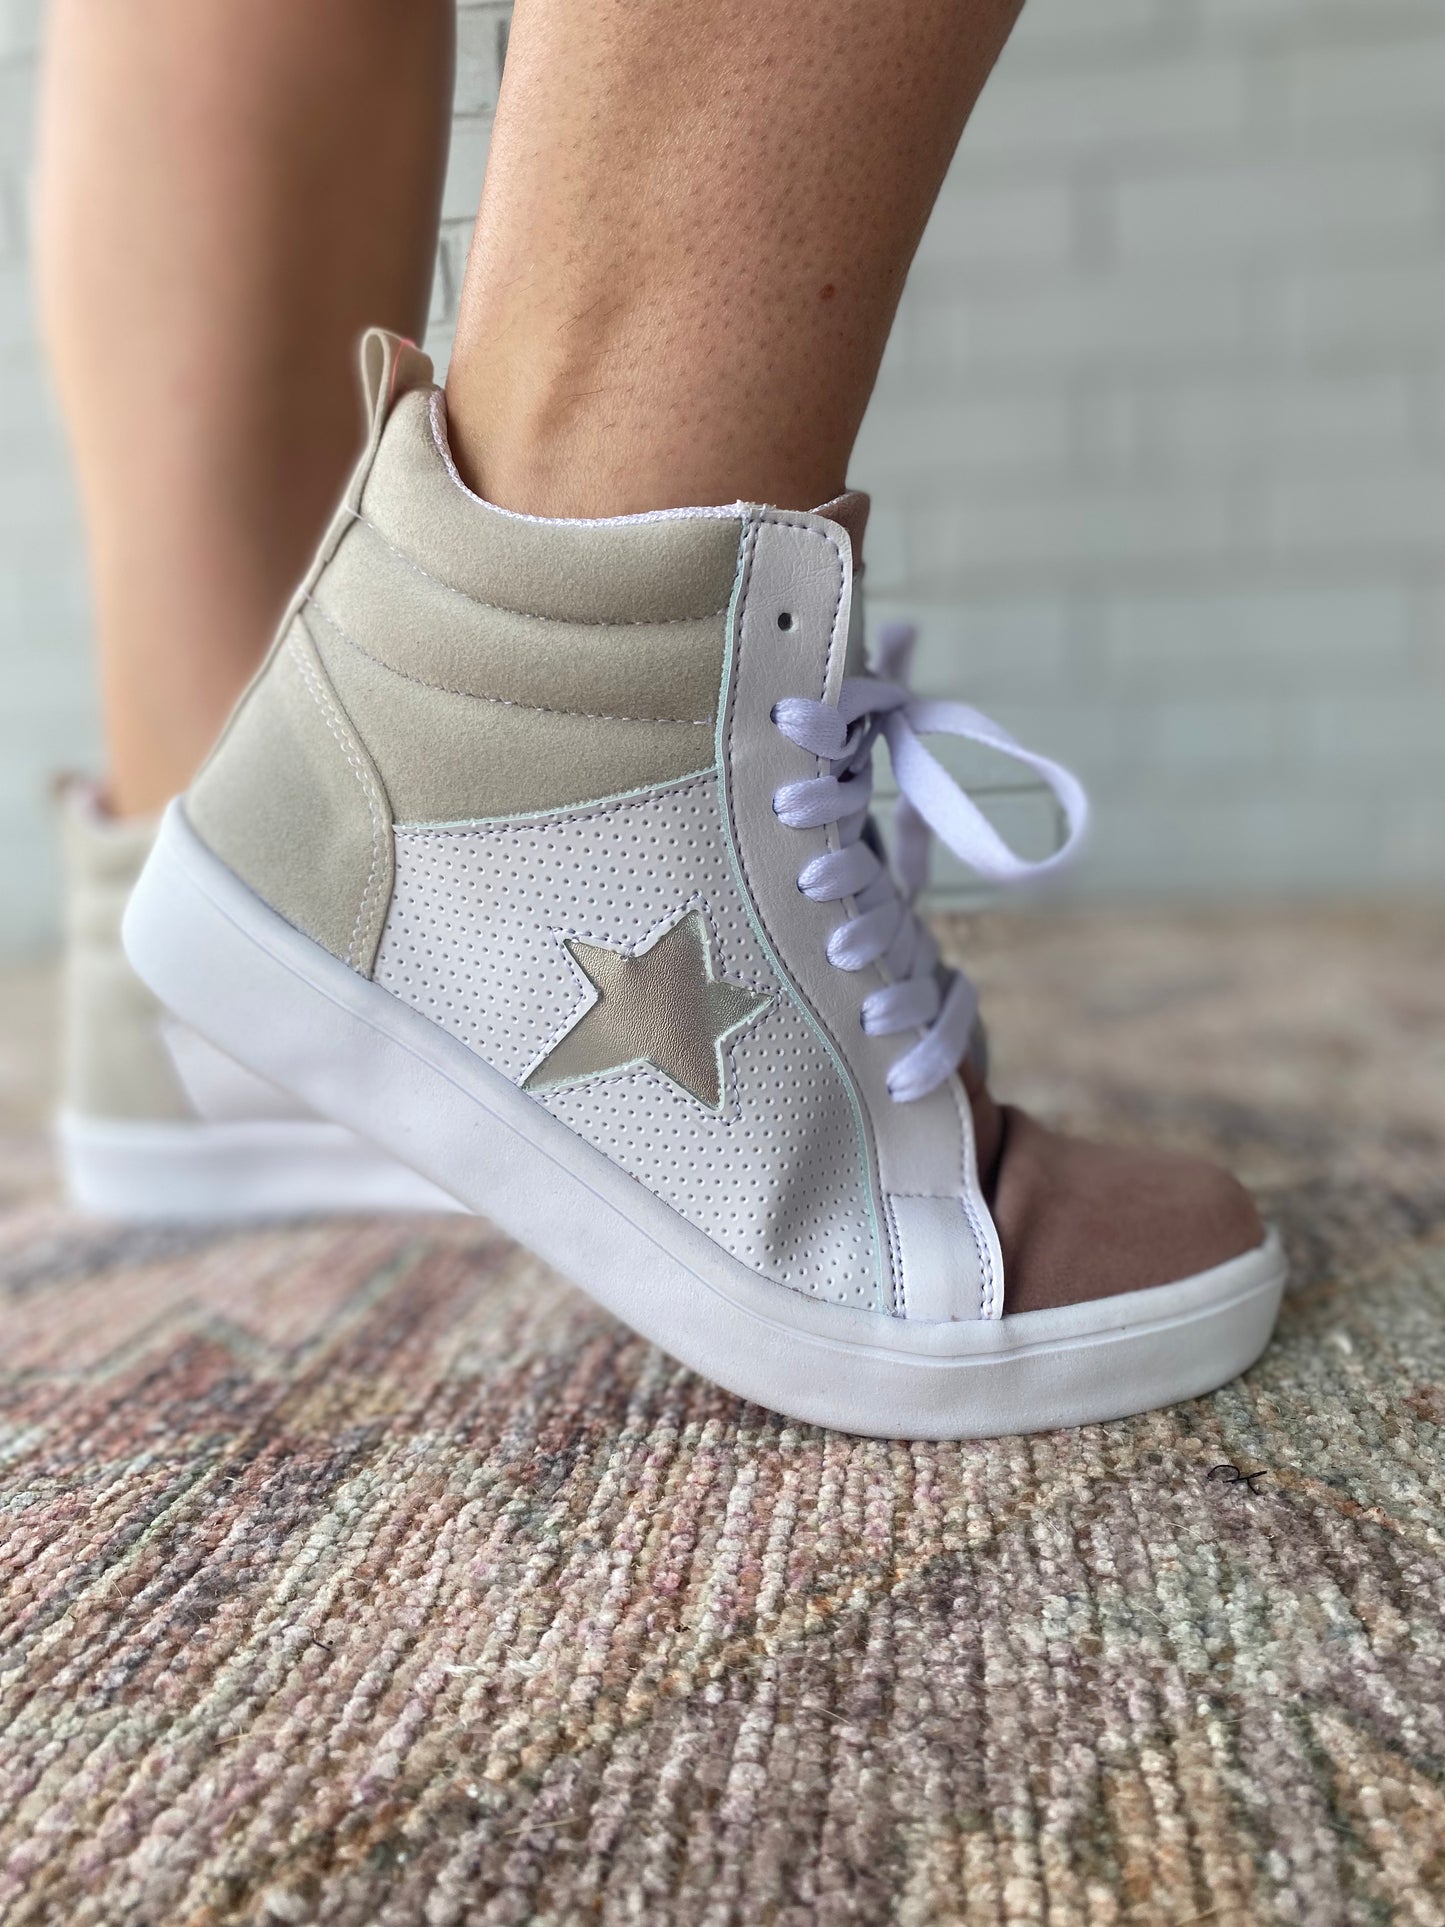 Piccolo Babes Hightop Sneakers